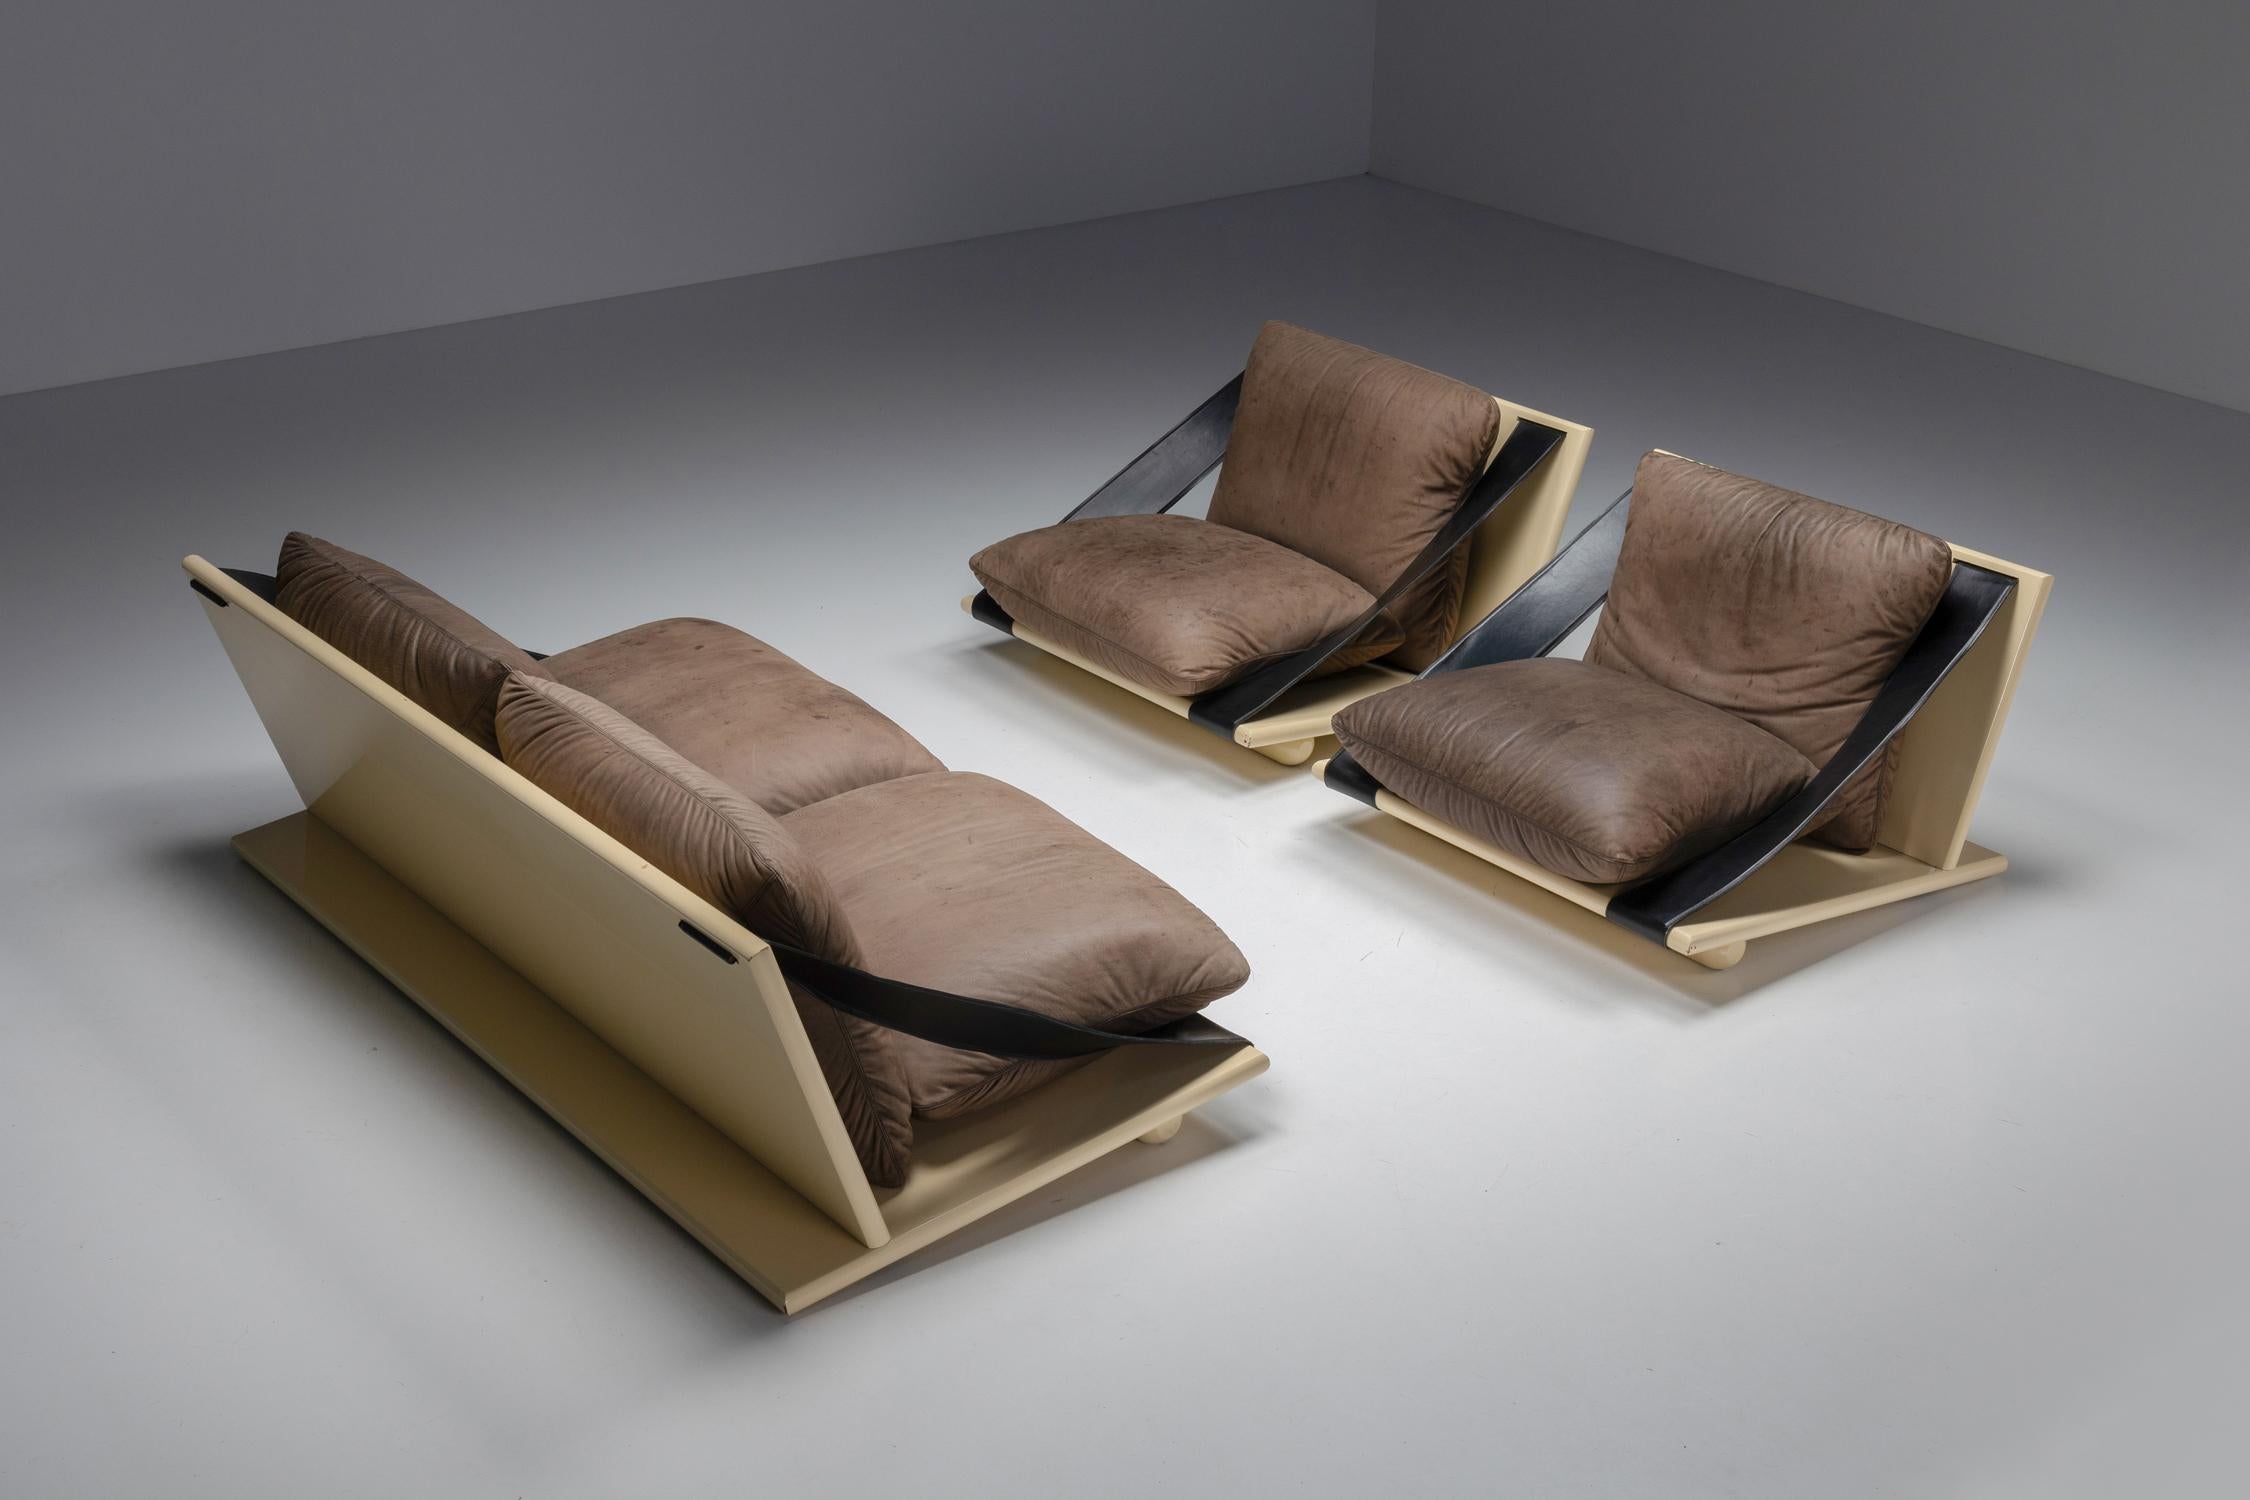 Lounge Chairs, Lacquer & Leather, Italian Design, 1970s For Sale 8